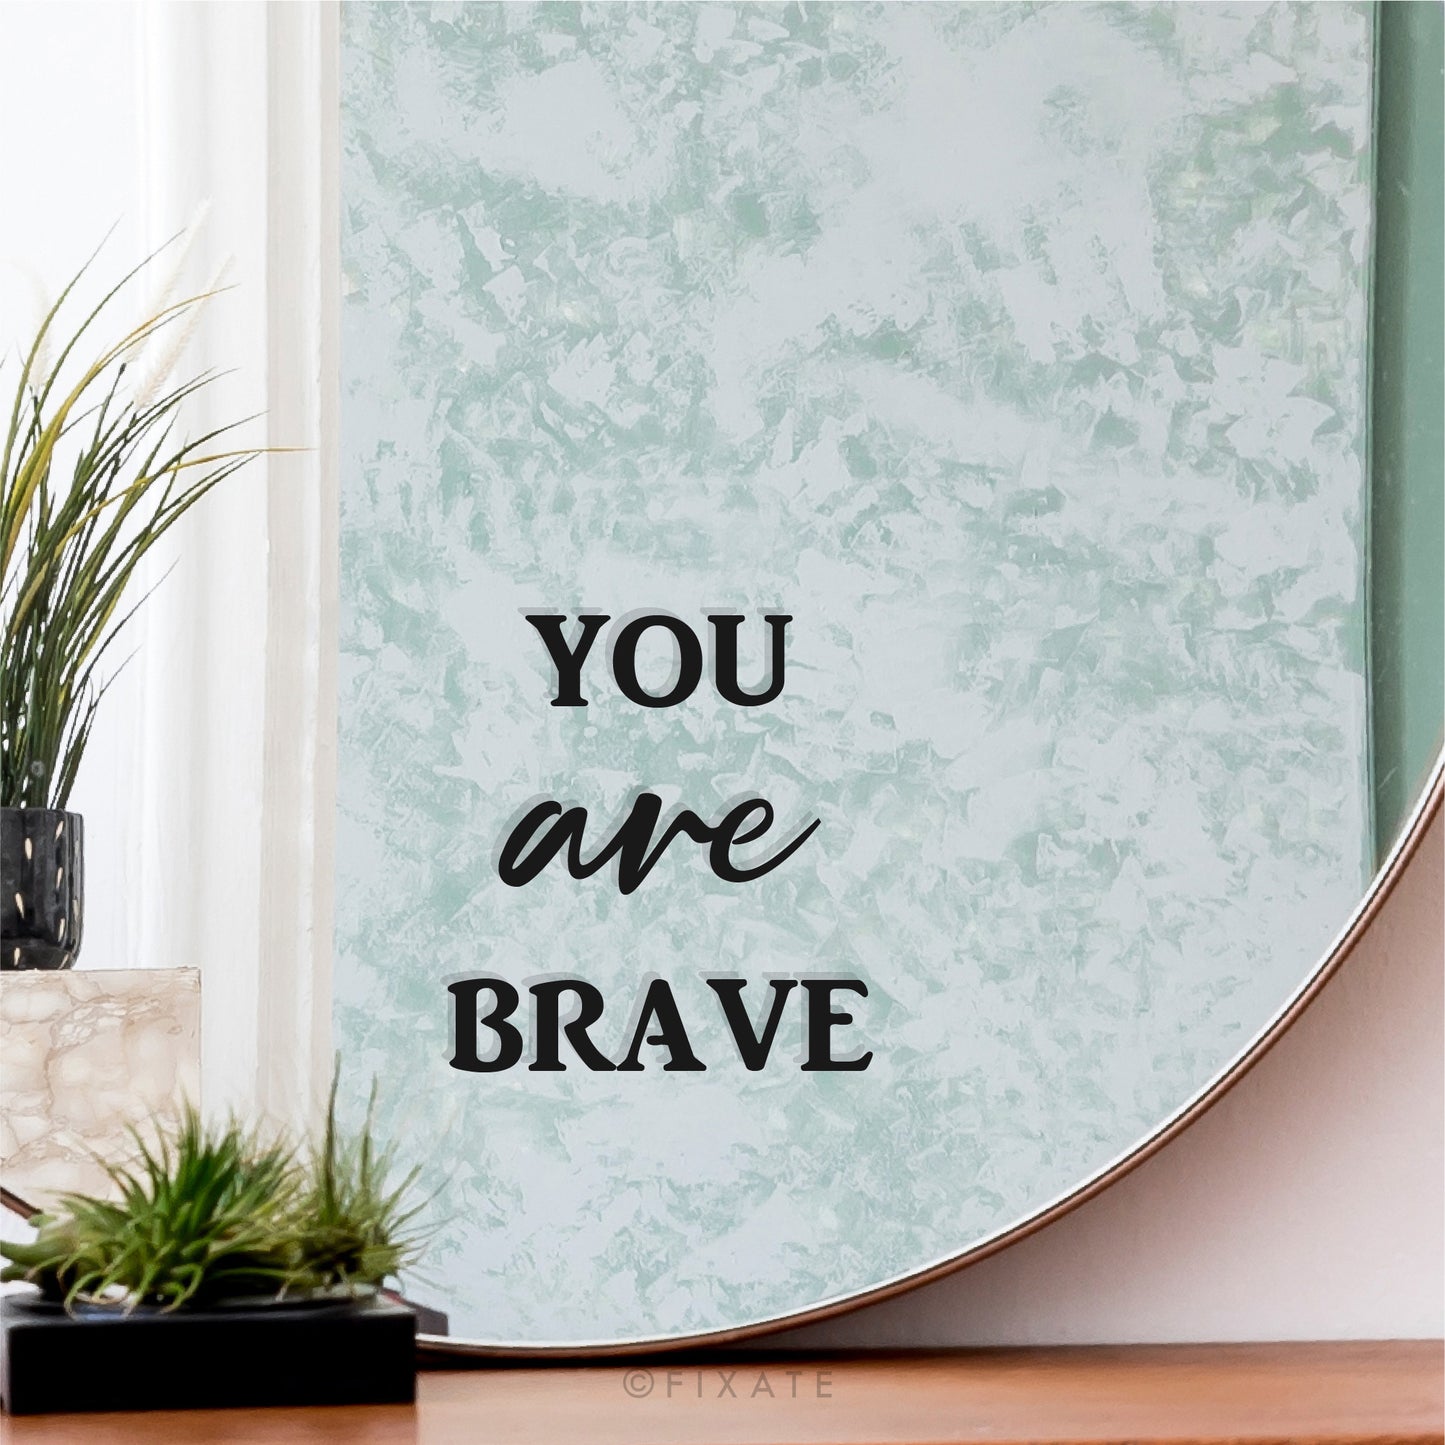 I Am Brave Laptop Mirror Decal Affirmation Sticker For Mirror Or Macbook You Are Brave Vinyl Decal Positive Quote Bathroom Decor